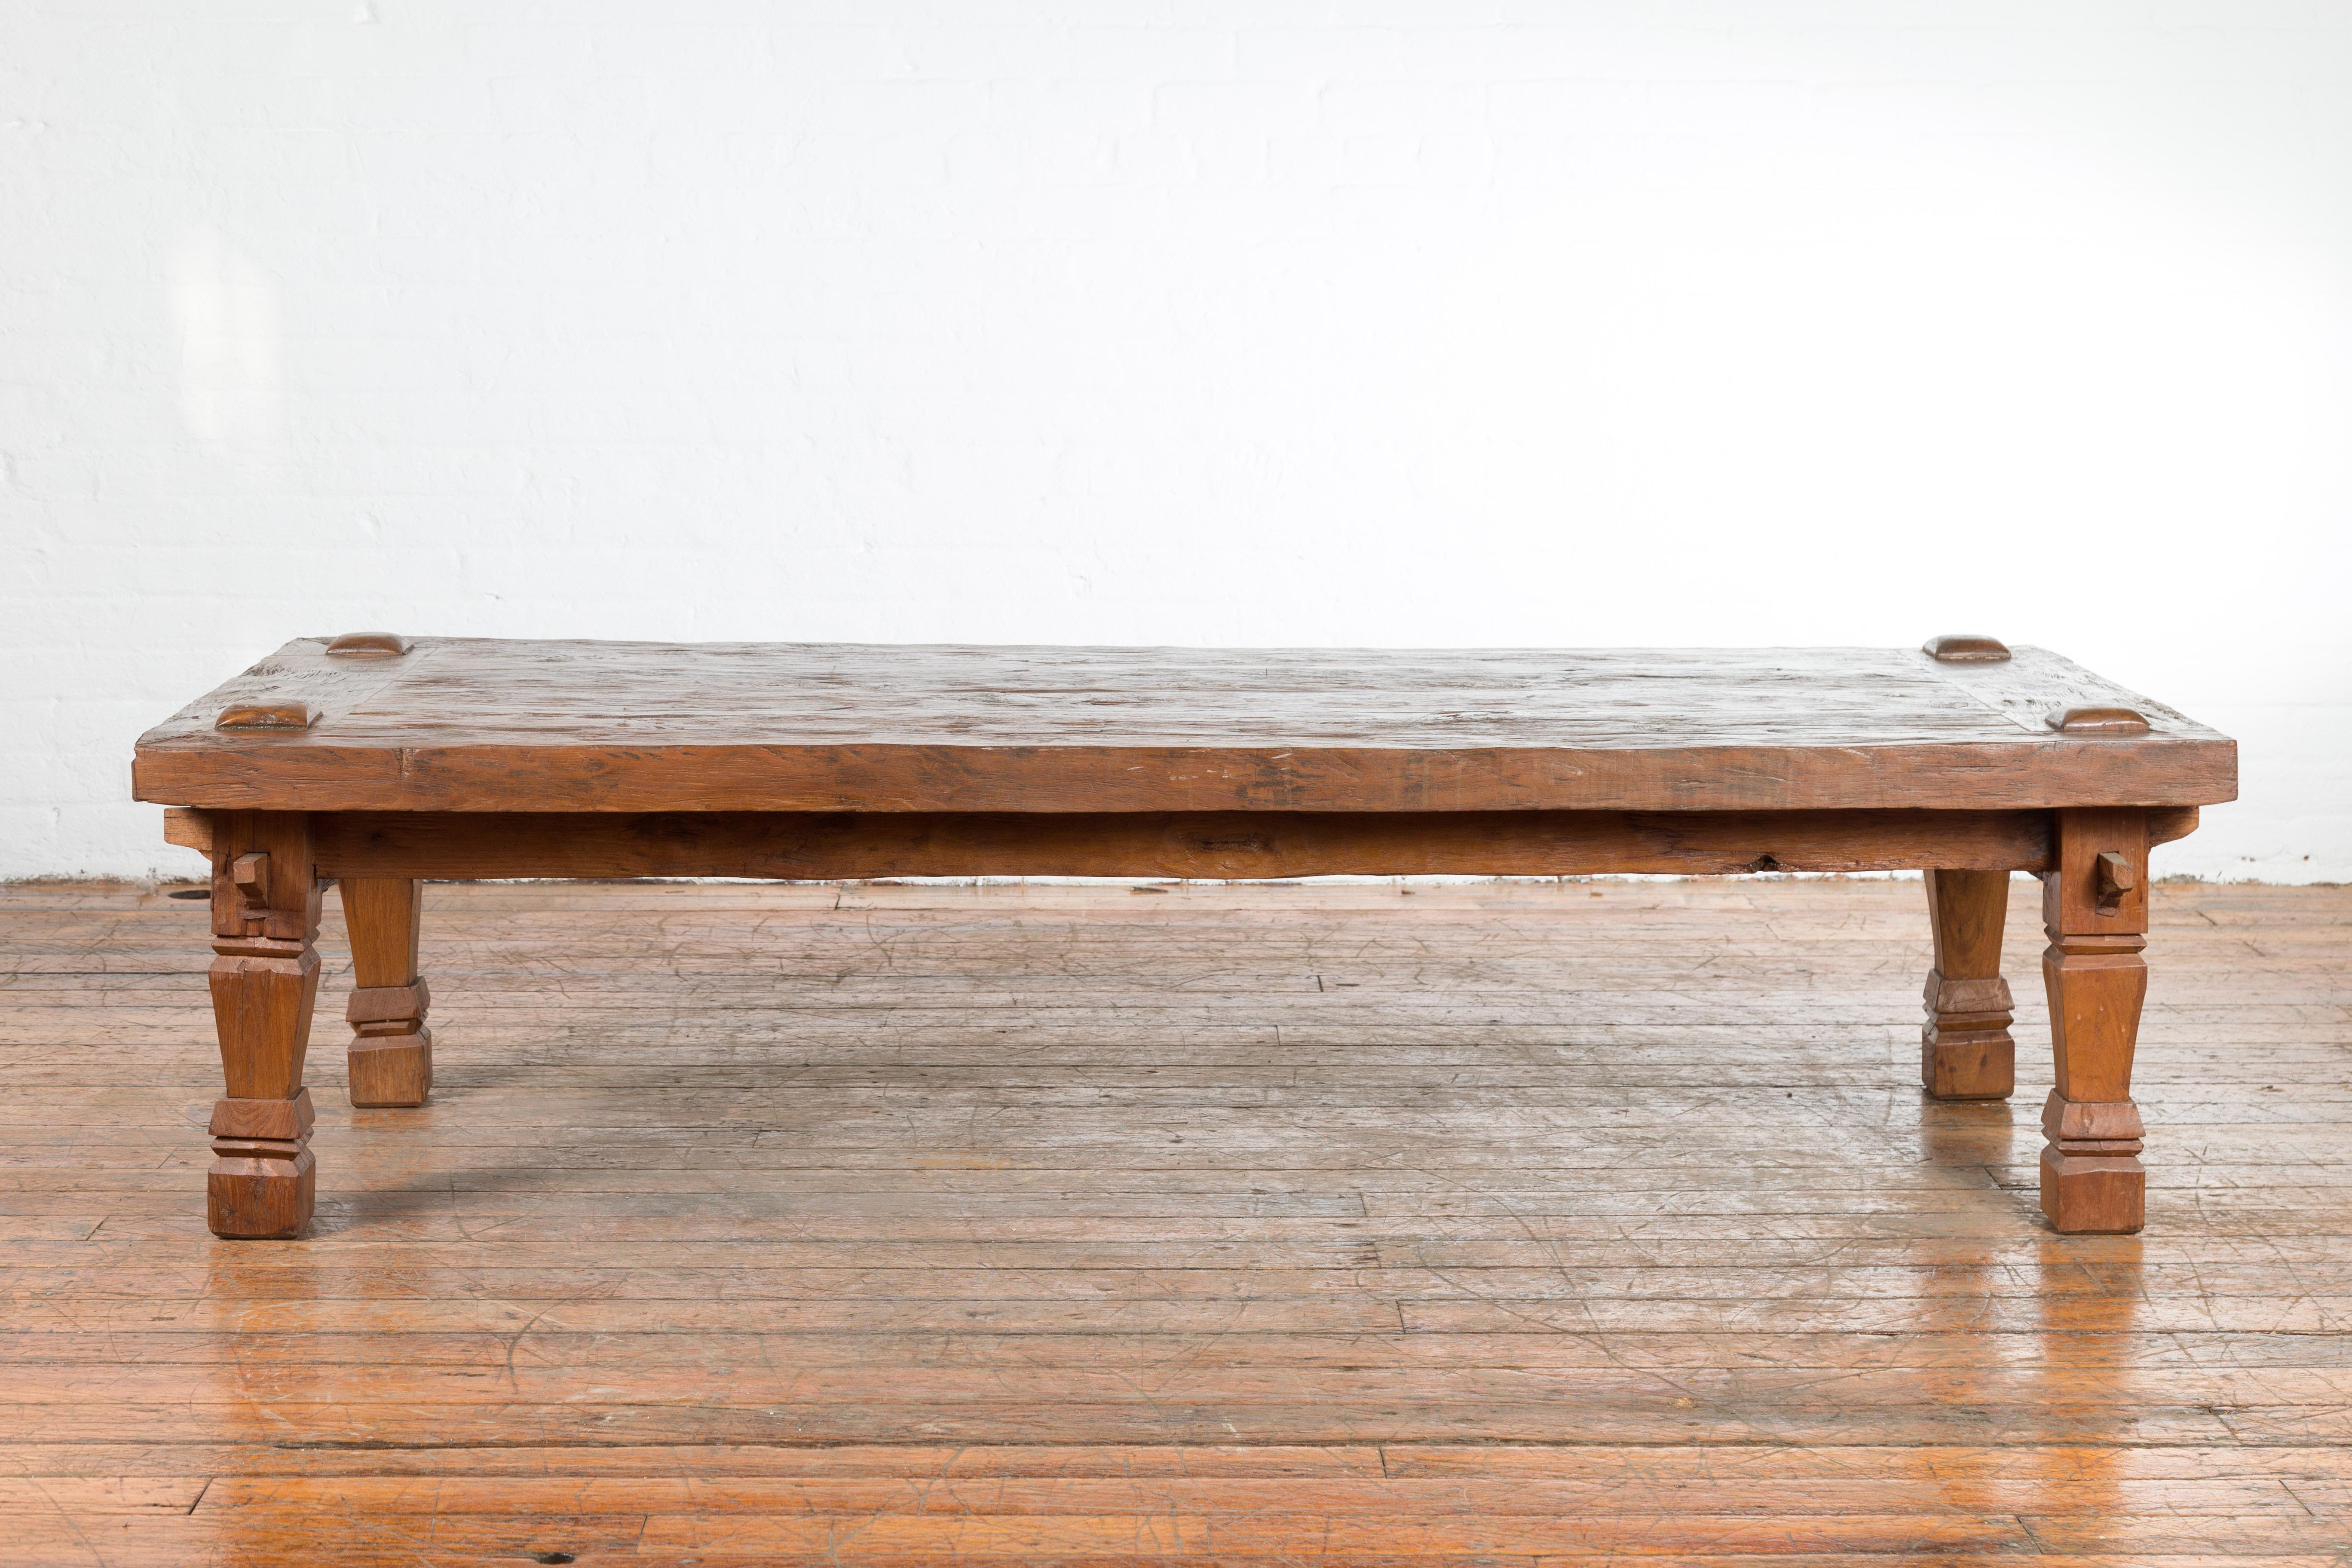 A 19th century Indonesian wooden coffee table from Madura with carved legs and raised joints. Created in Madura off of the northeastern coast of Java during the 19th century, this wooden coffee table features a nicely rustic rectangular top with